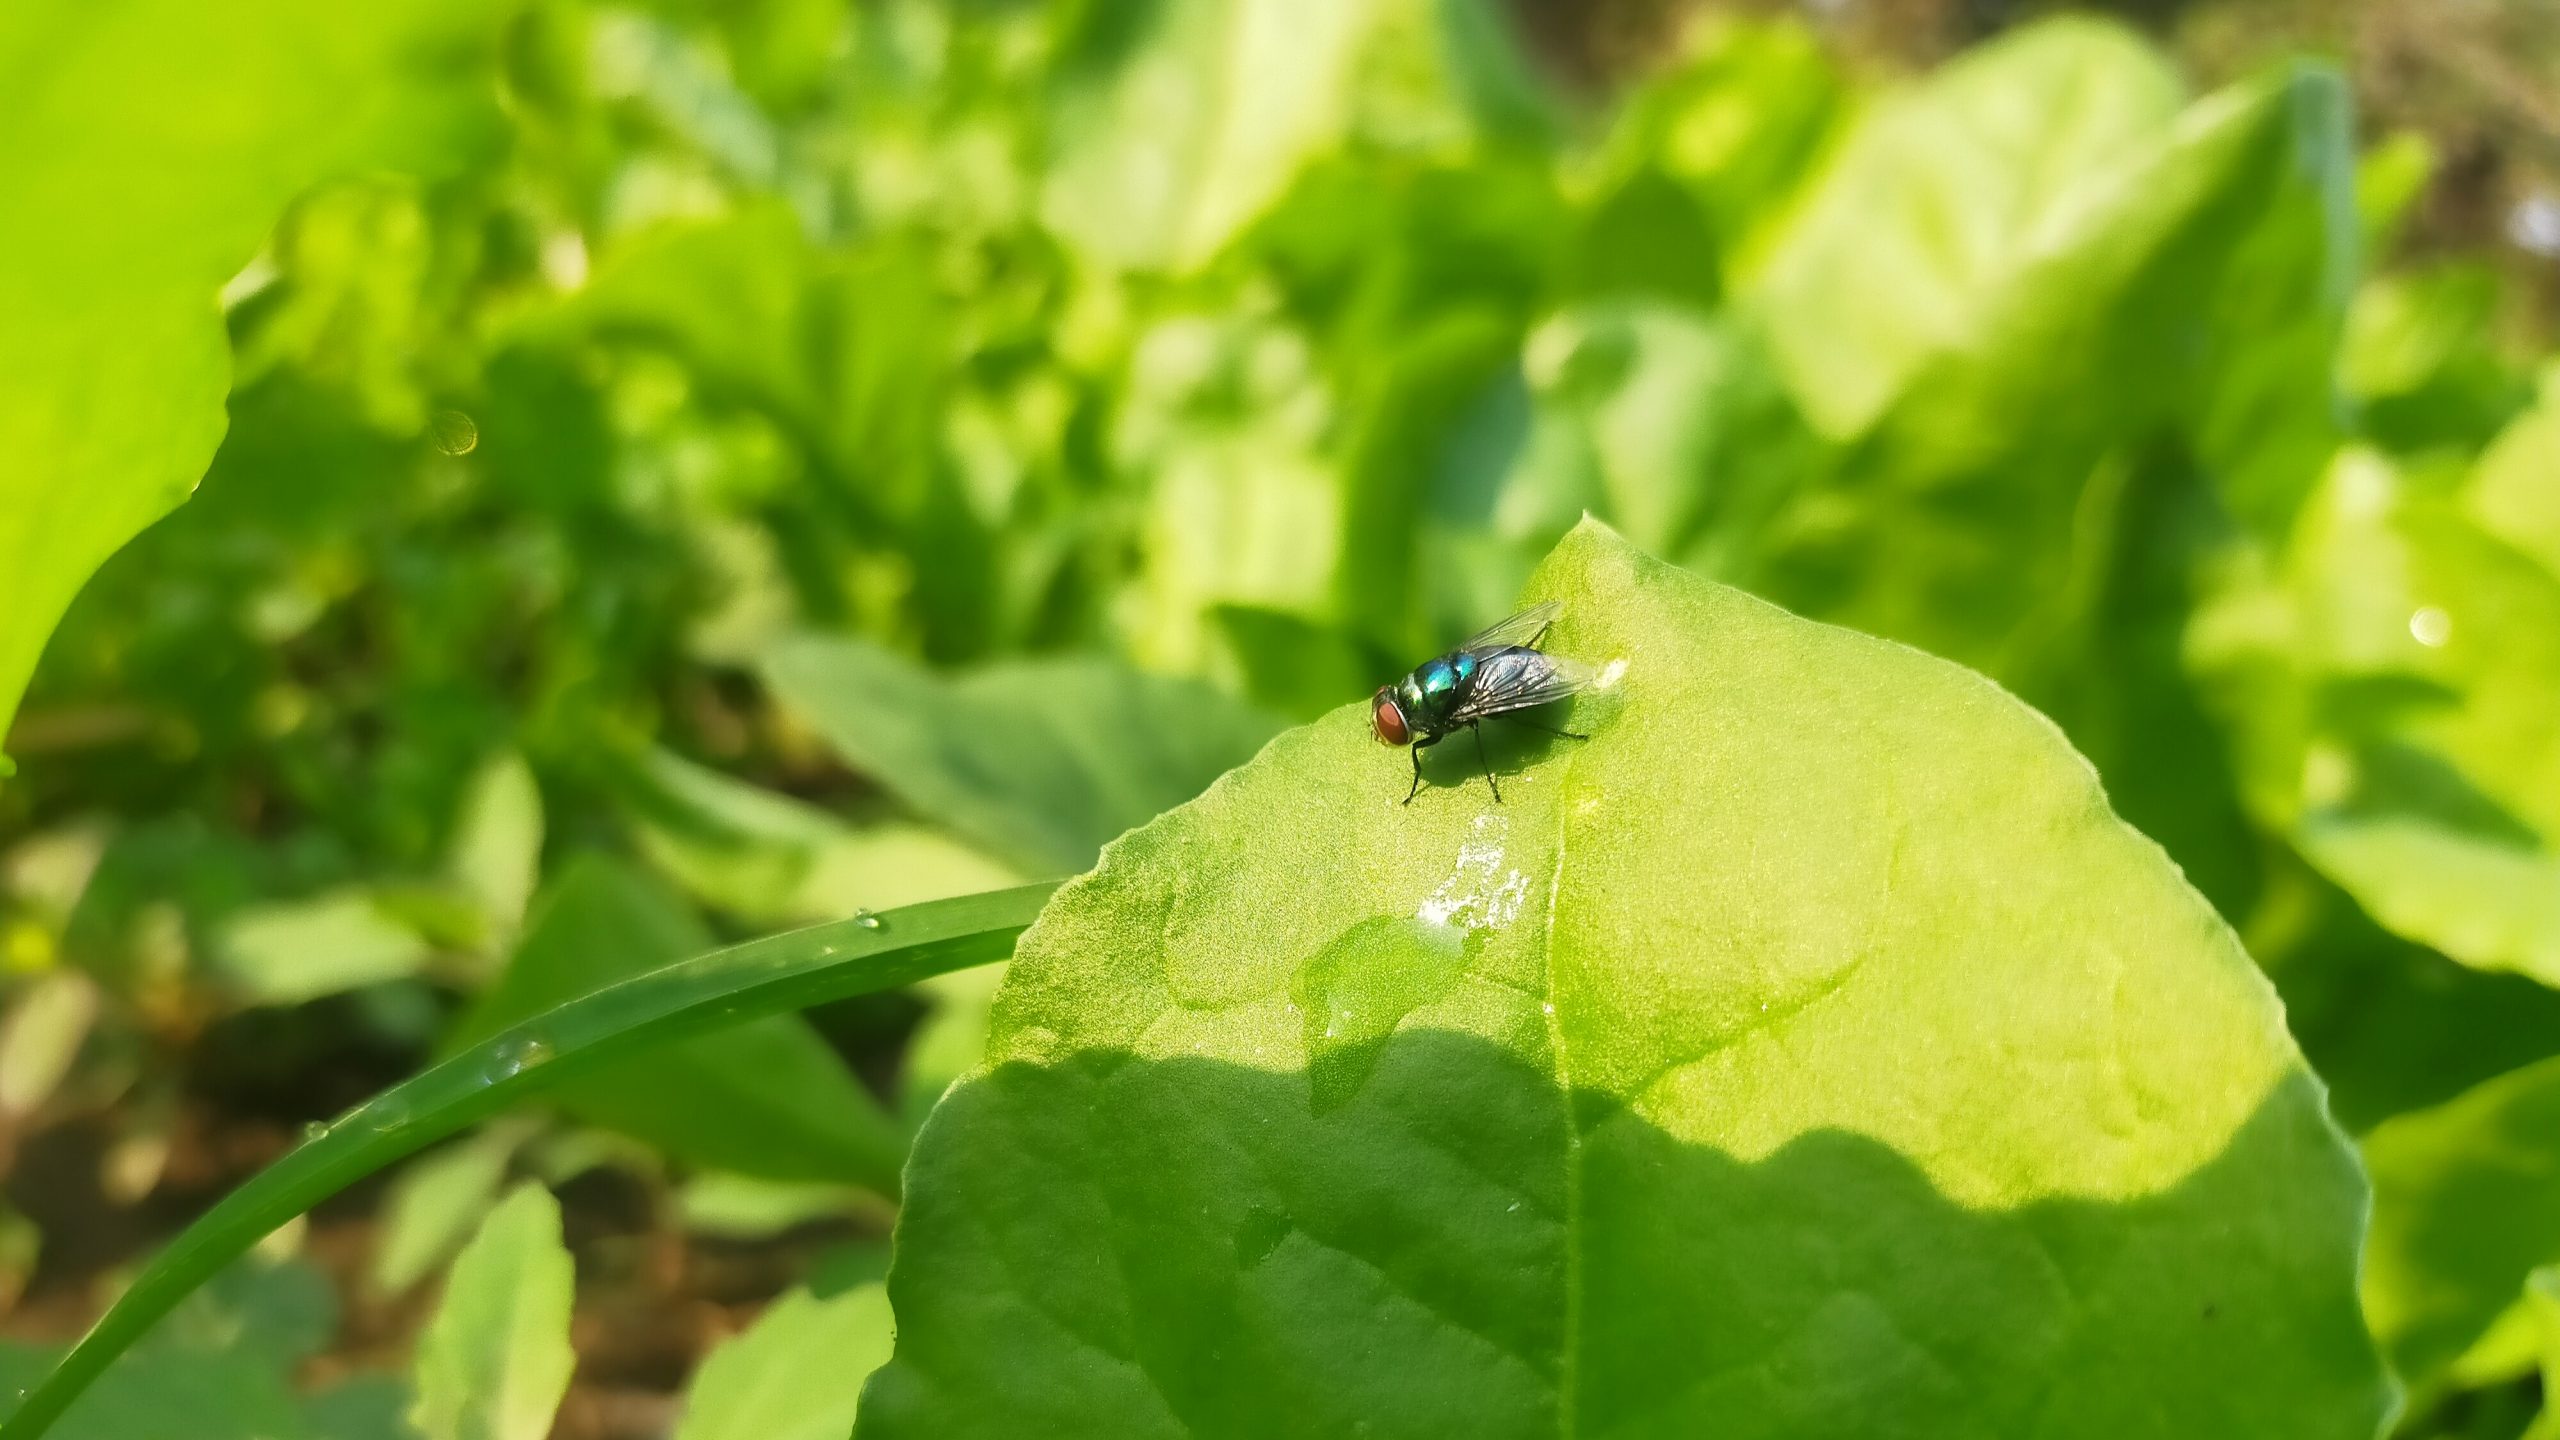 Housefly on the plant leaf